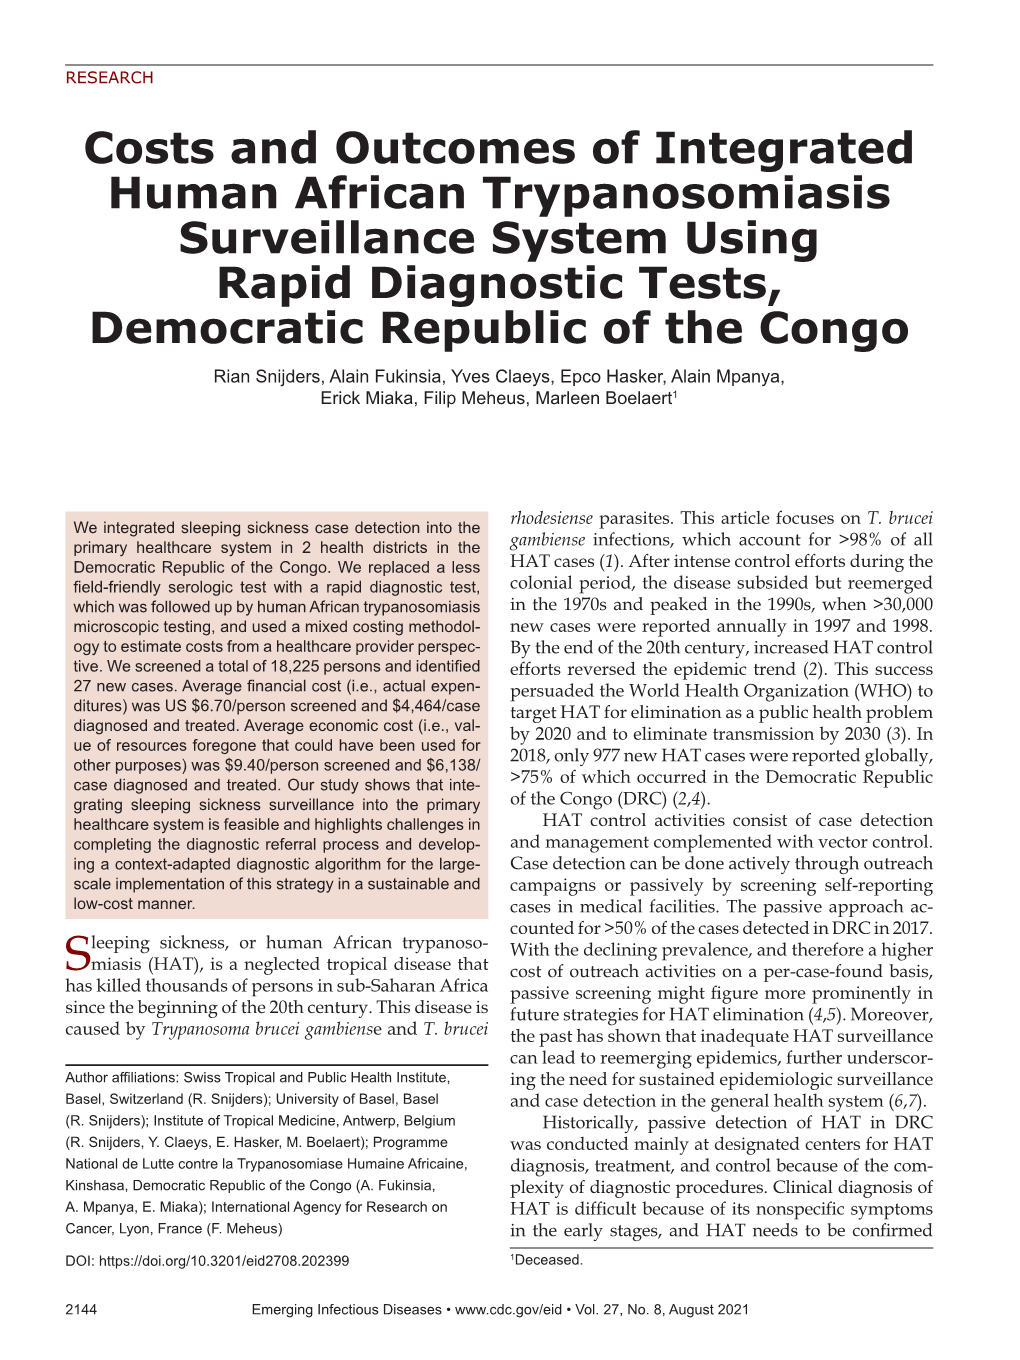 Costs and Outcomes of Integrated Human African Trypanosomiasis